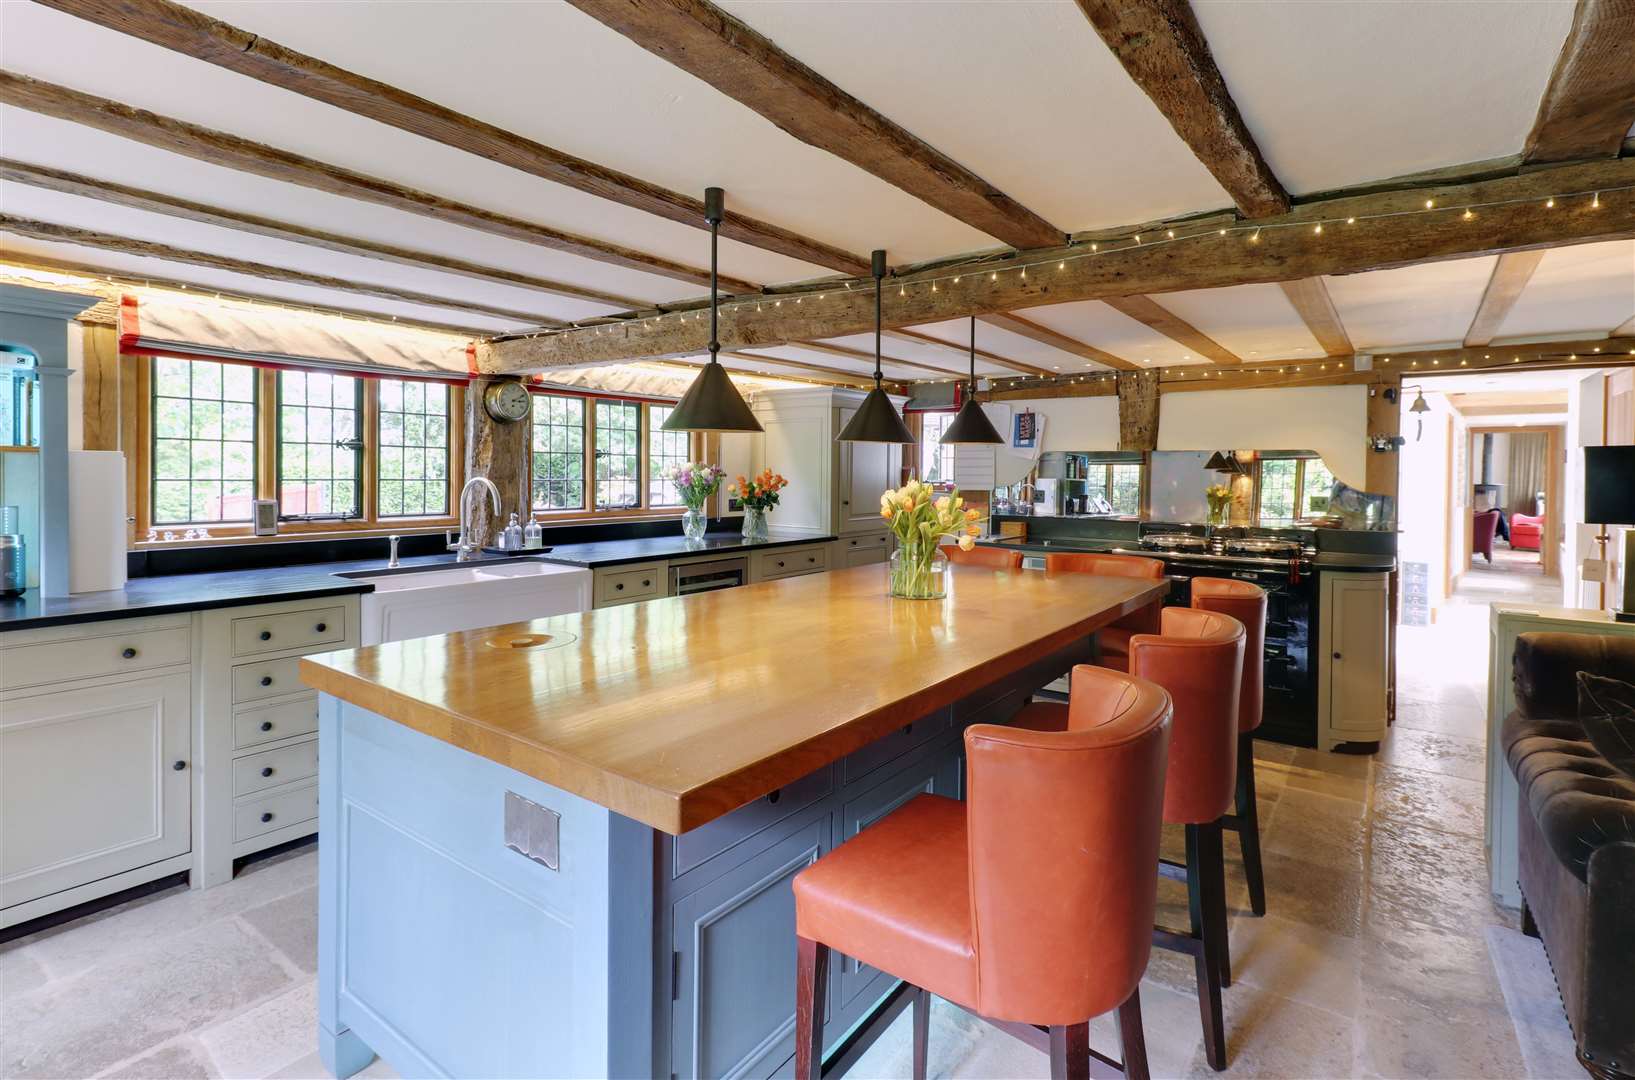 The kitchen and breakfast room has a three oven Aga and Gaggenau and Liebherr appliances. Picture: Savills